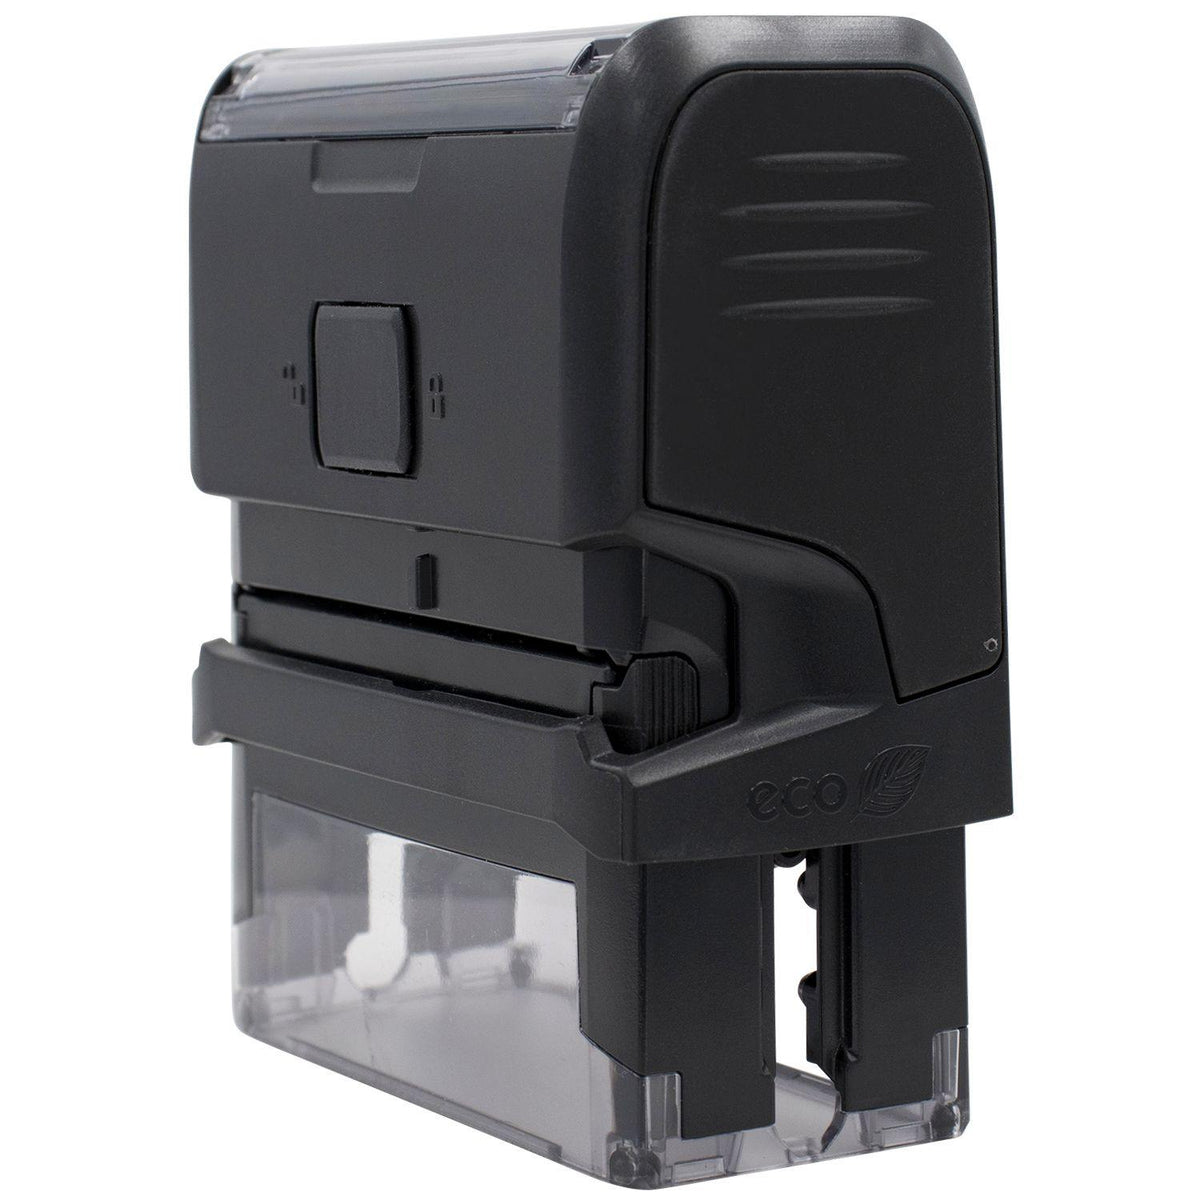 Self Inking Community Property Stamp - Engineer Seal Stamps - Brand_Trodat, Impression Size_Small, Stamp Type_Self-Inking Stamp, Type of Use_Professional